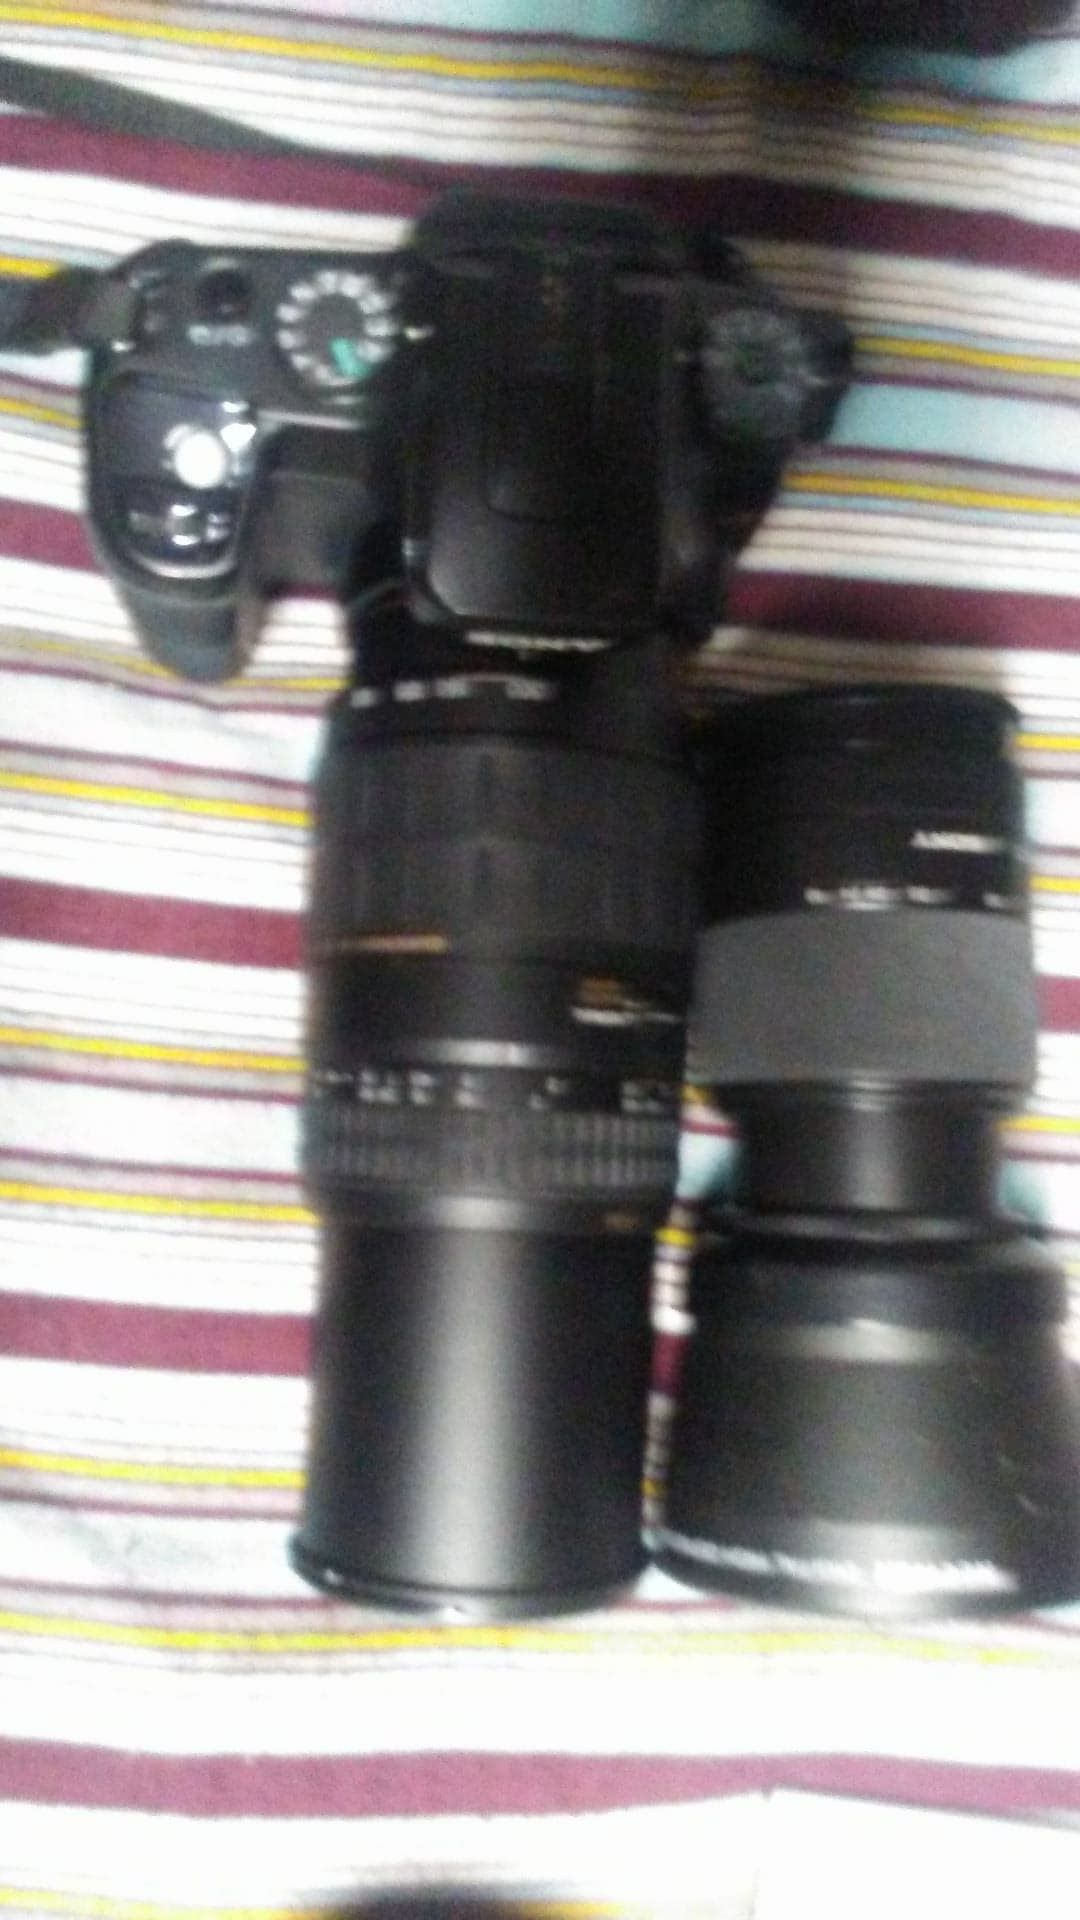 sony camera with lenses